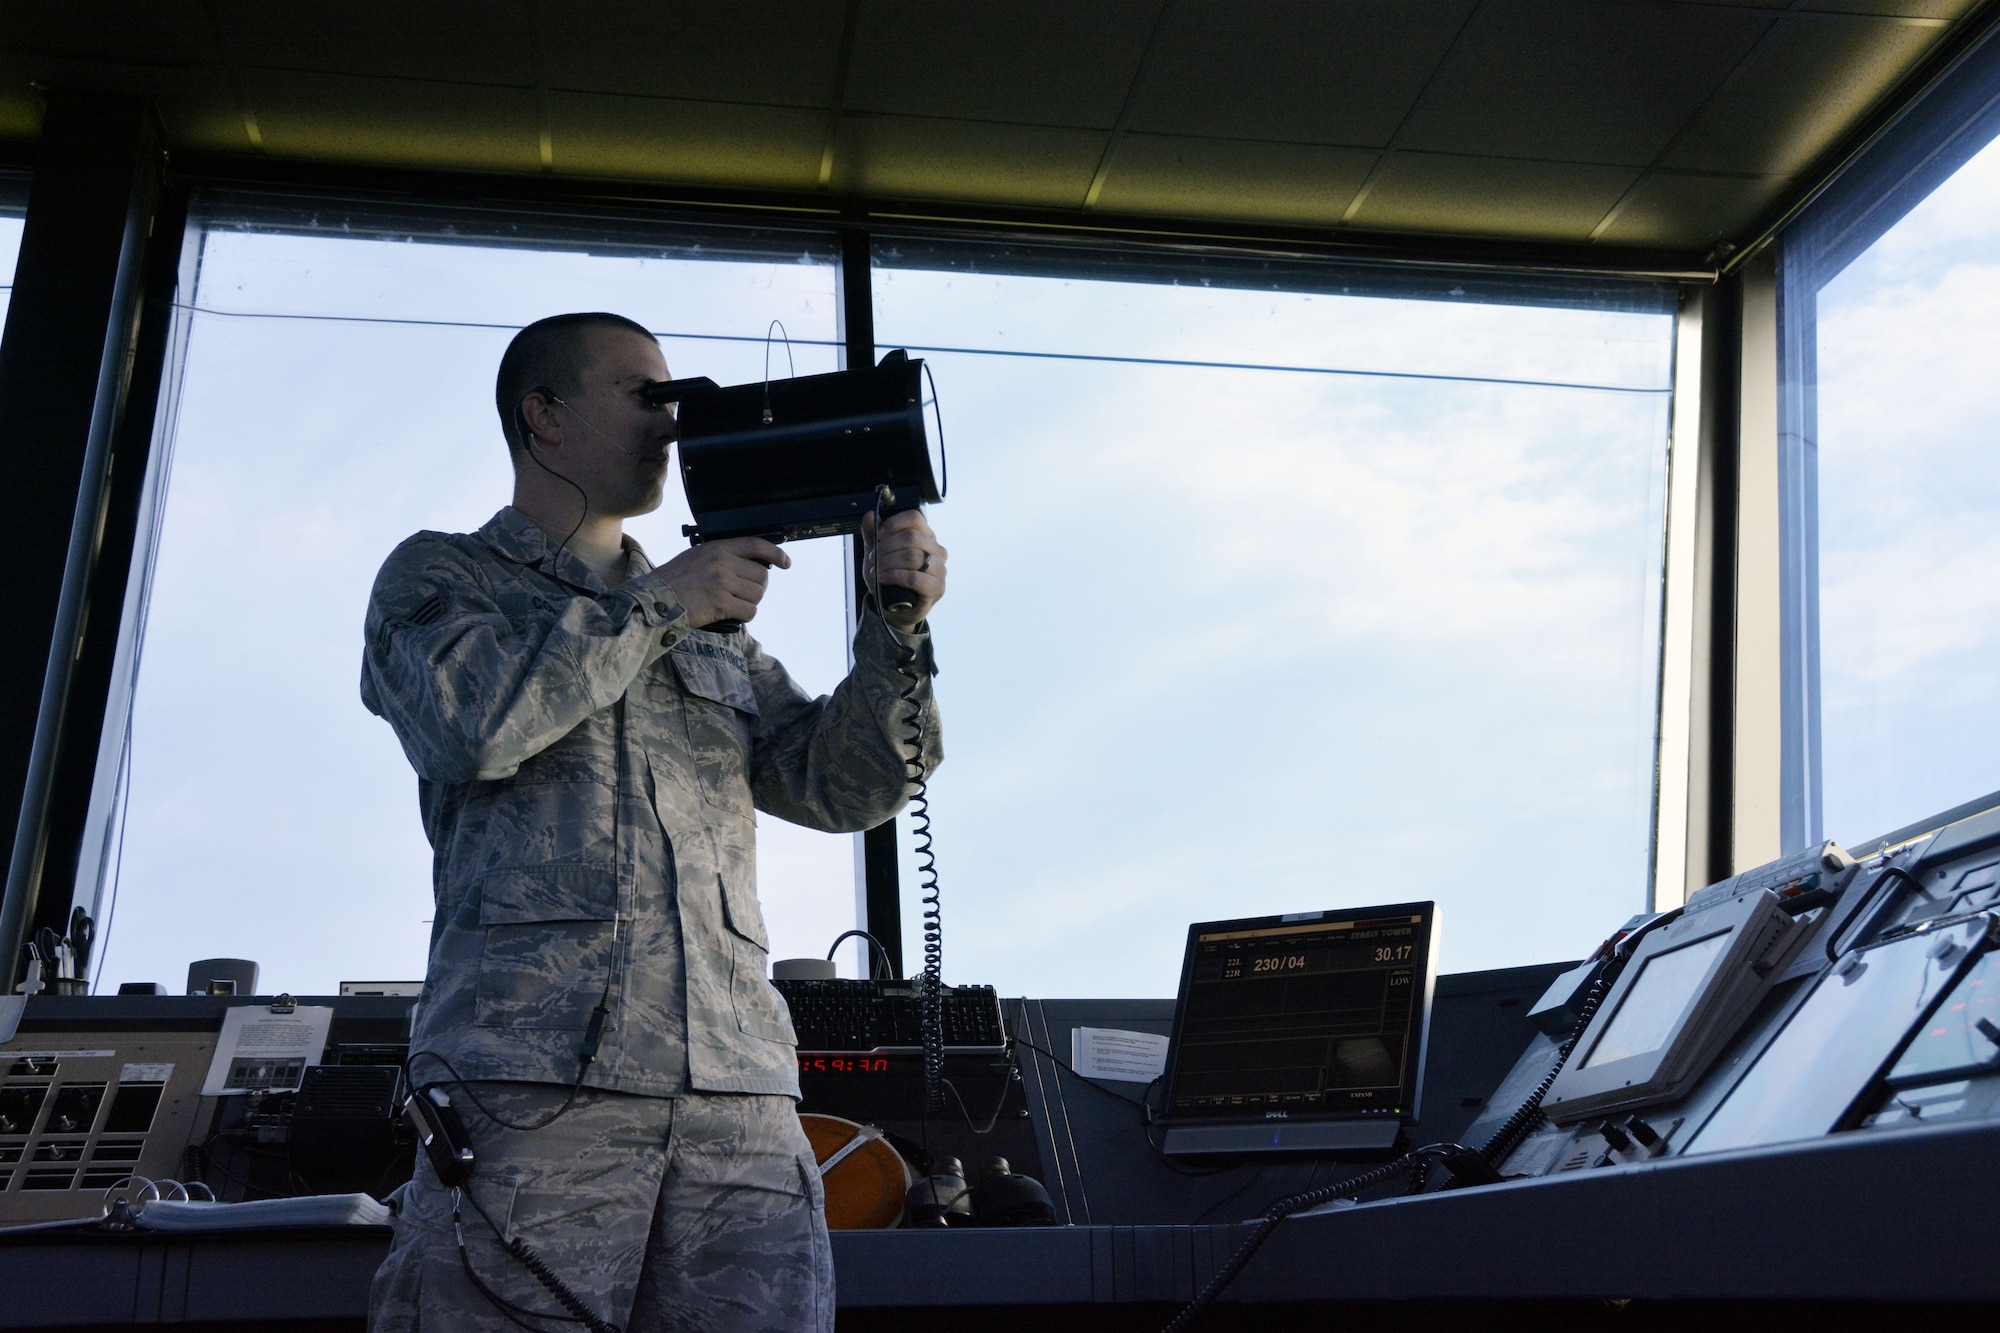 U.S. Air Force Senior Airman Justin W. Condon, 235th Air Traffic Control Squadron, local controller for airborne aircraft, conducts a light gun signal check with approaching aircraft, July 8, 2105. This device is used as a means of communicating with aircraft in case of radio failure. The 235th ATCS provides air traffic control services for all civilian and military aircraft at the Stanly County Airport, New London, N.C. (U.S. Air National Guard photo by Master Sgt. Patricia F. Moran, 145th Public Affairs/Released)